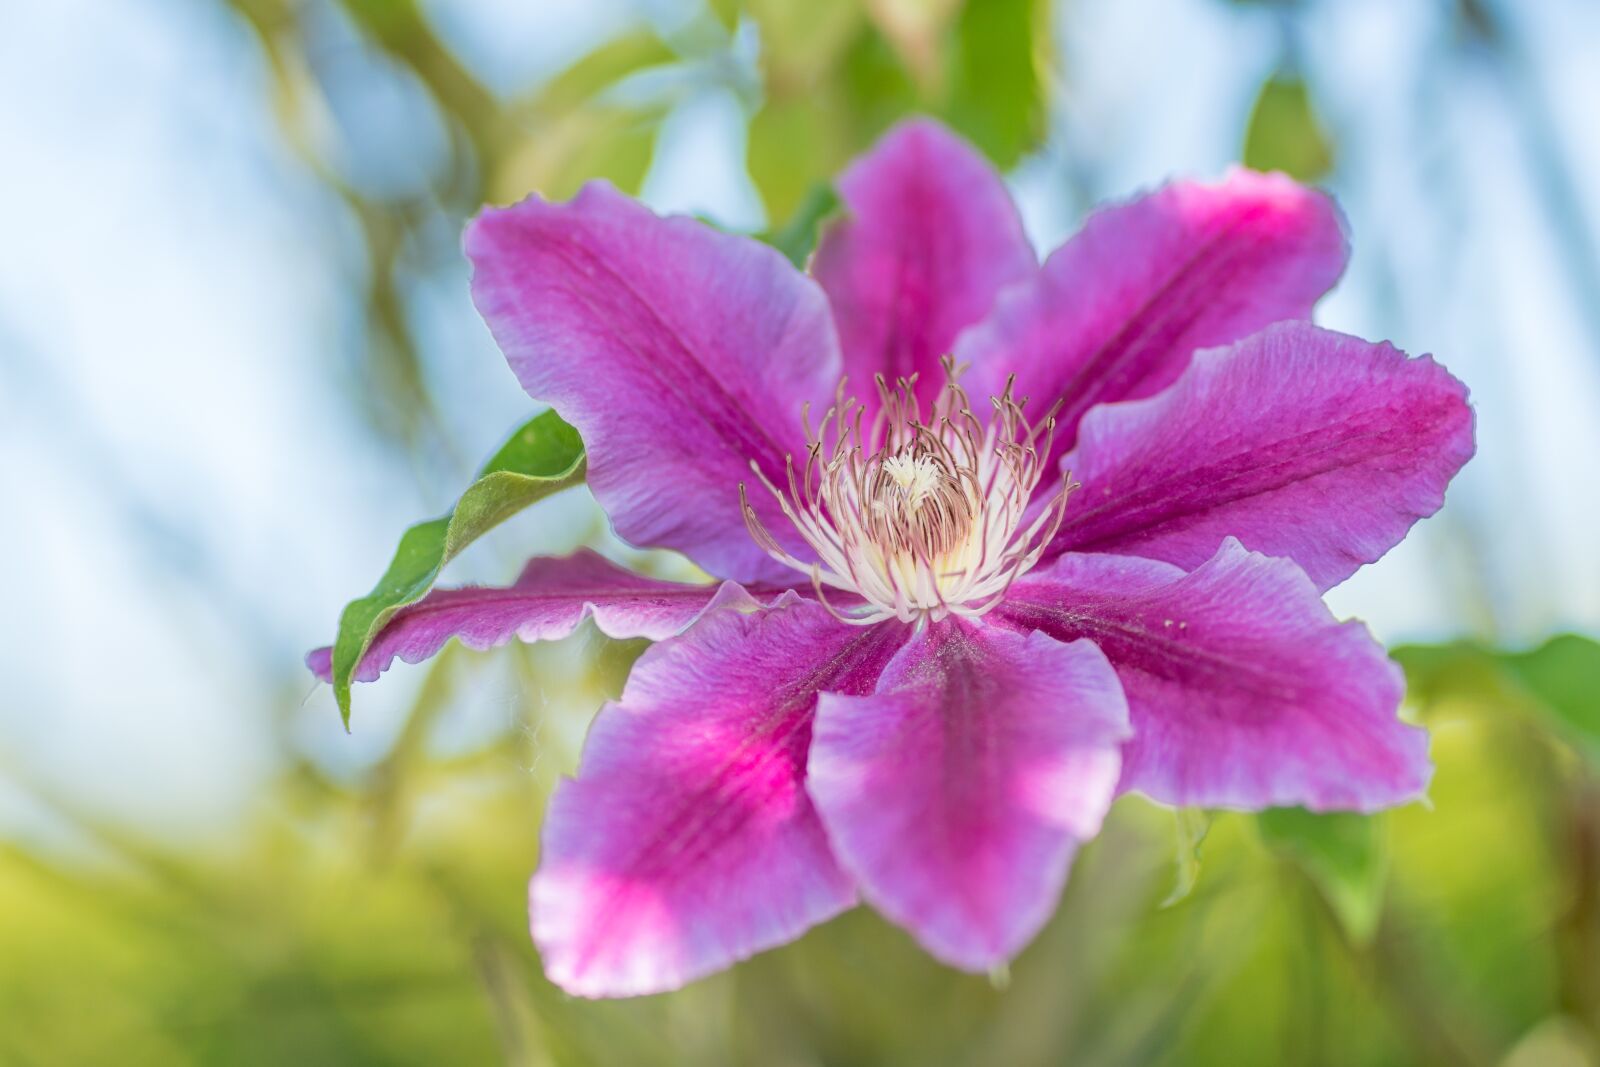 Sony a6500 sample photo. Clematis, climber plant, blossom photography